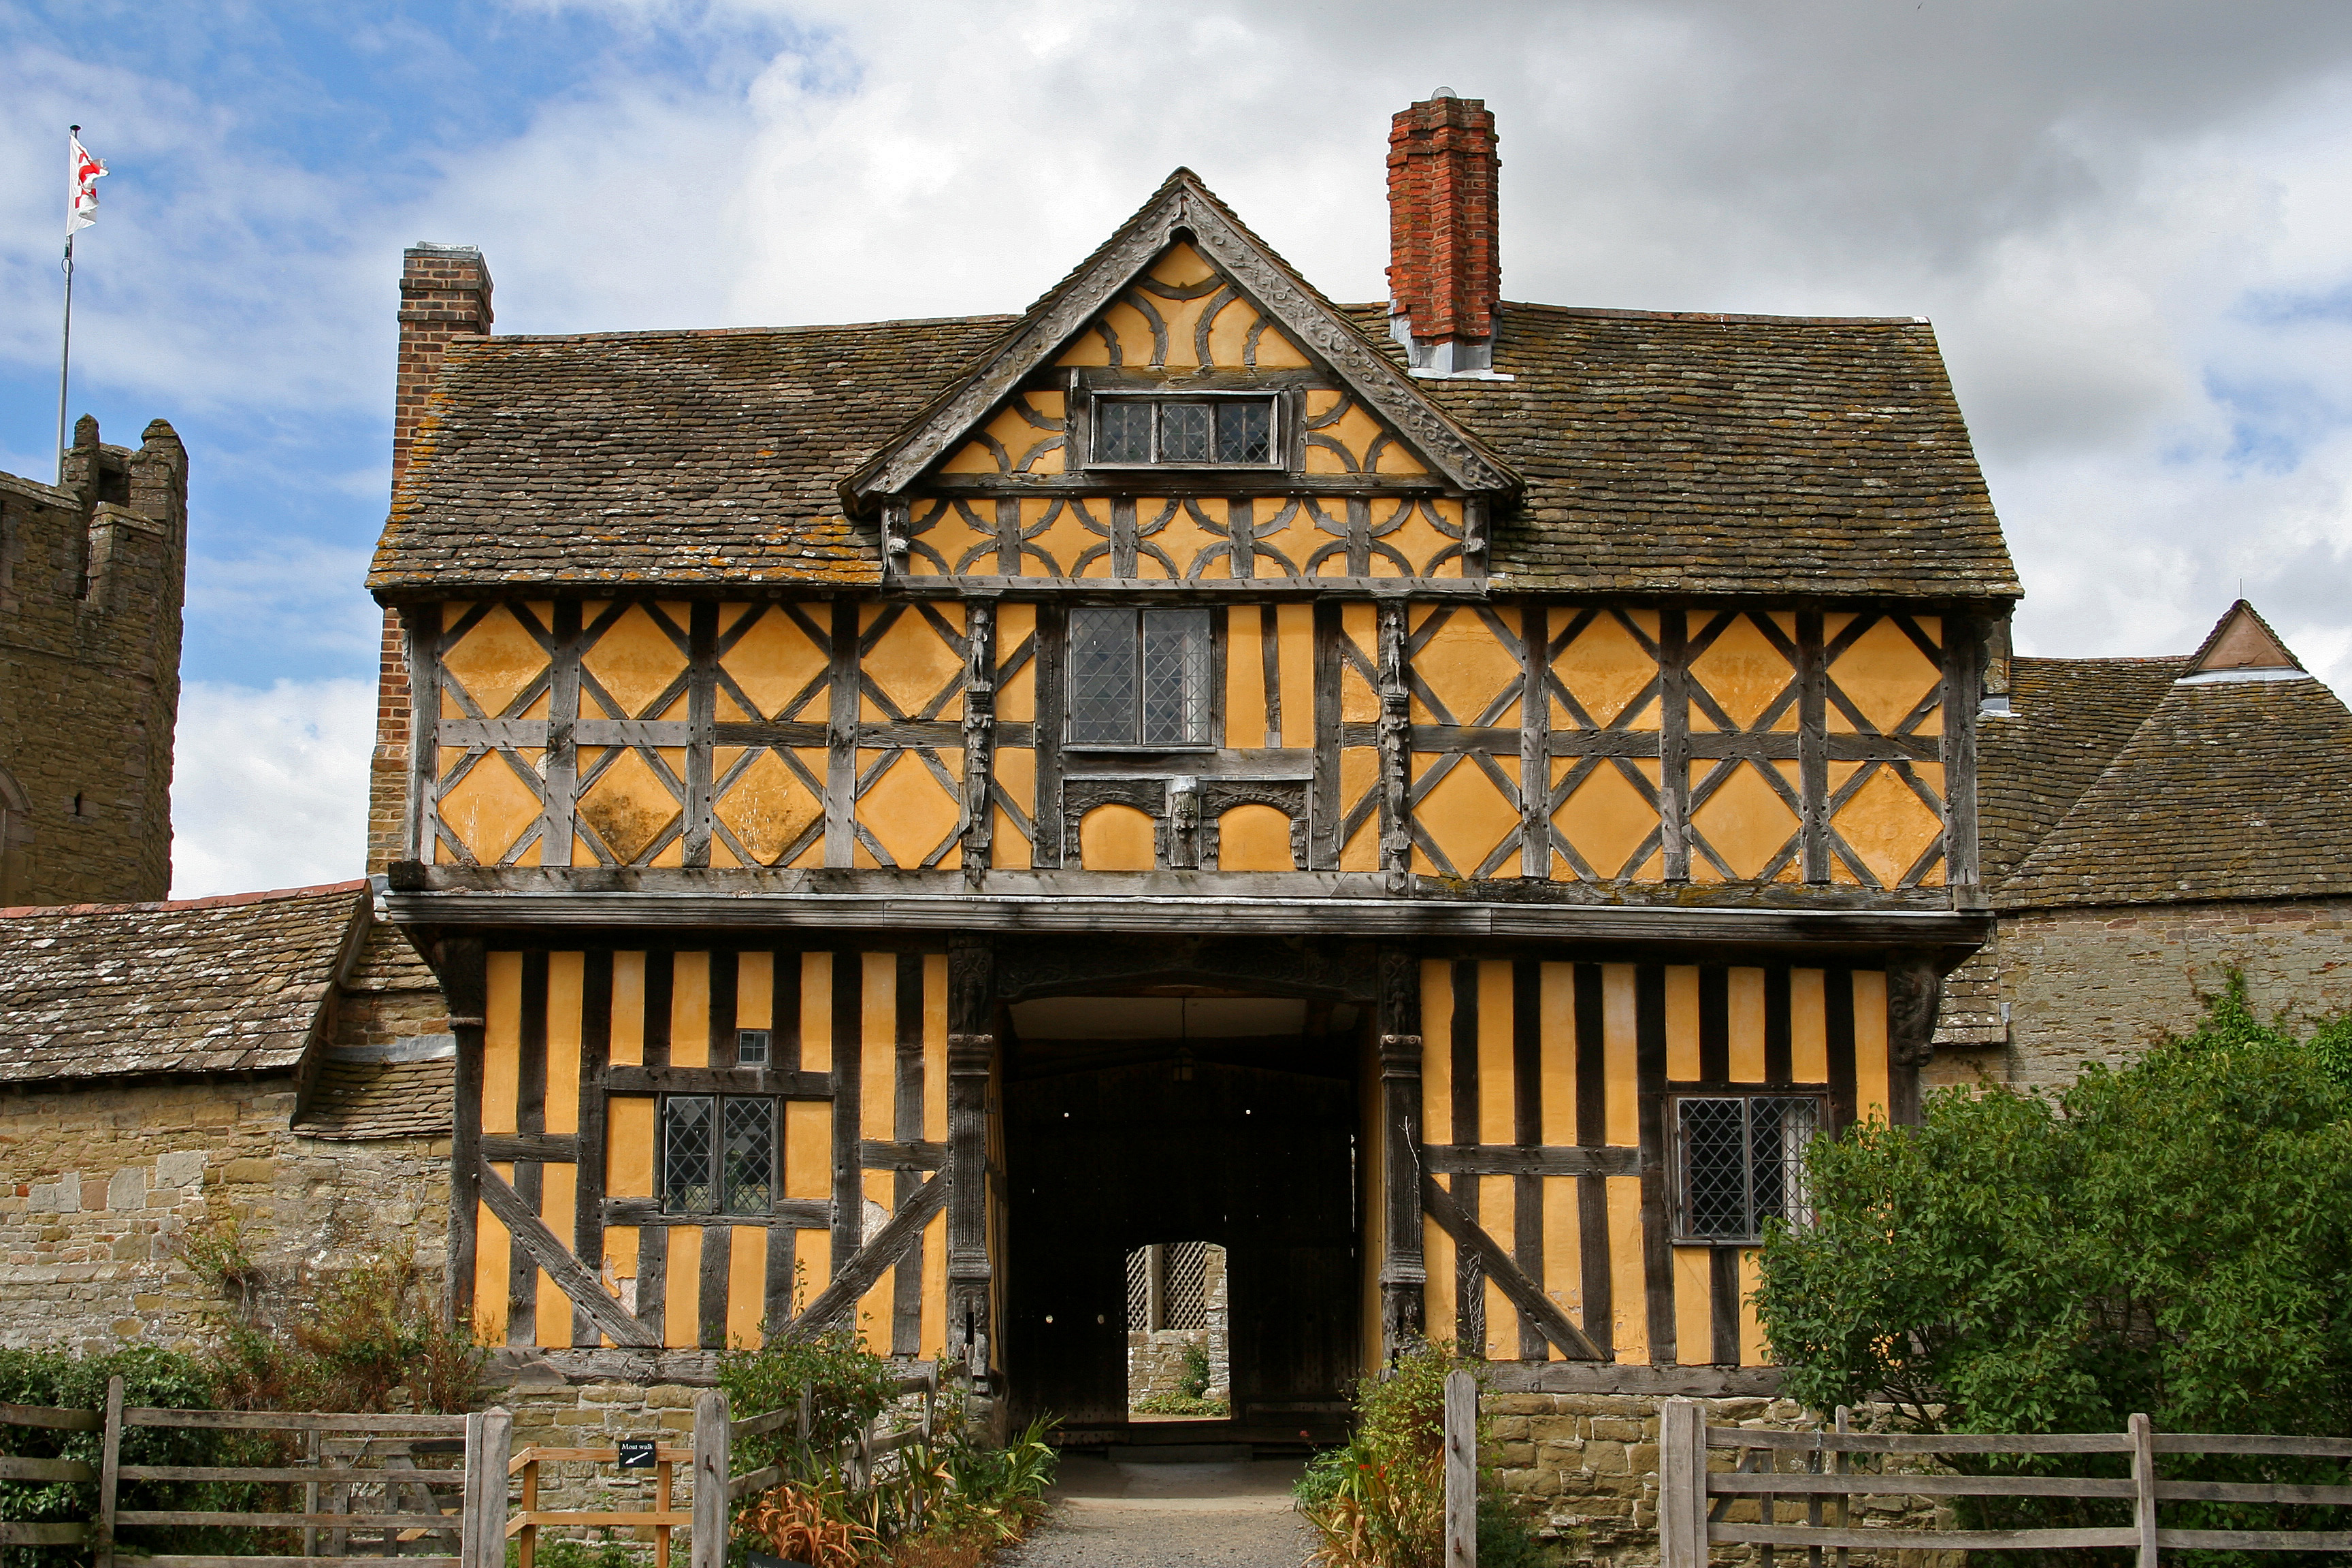 stokesay castle, Shropshire, medieval manor house, laurence of ludlow, yellow building